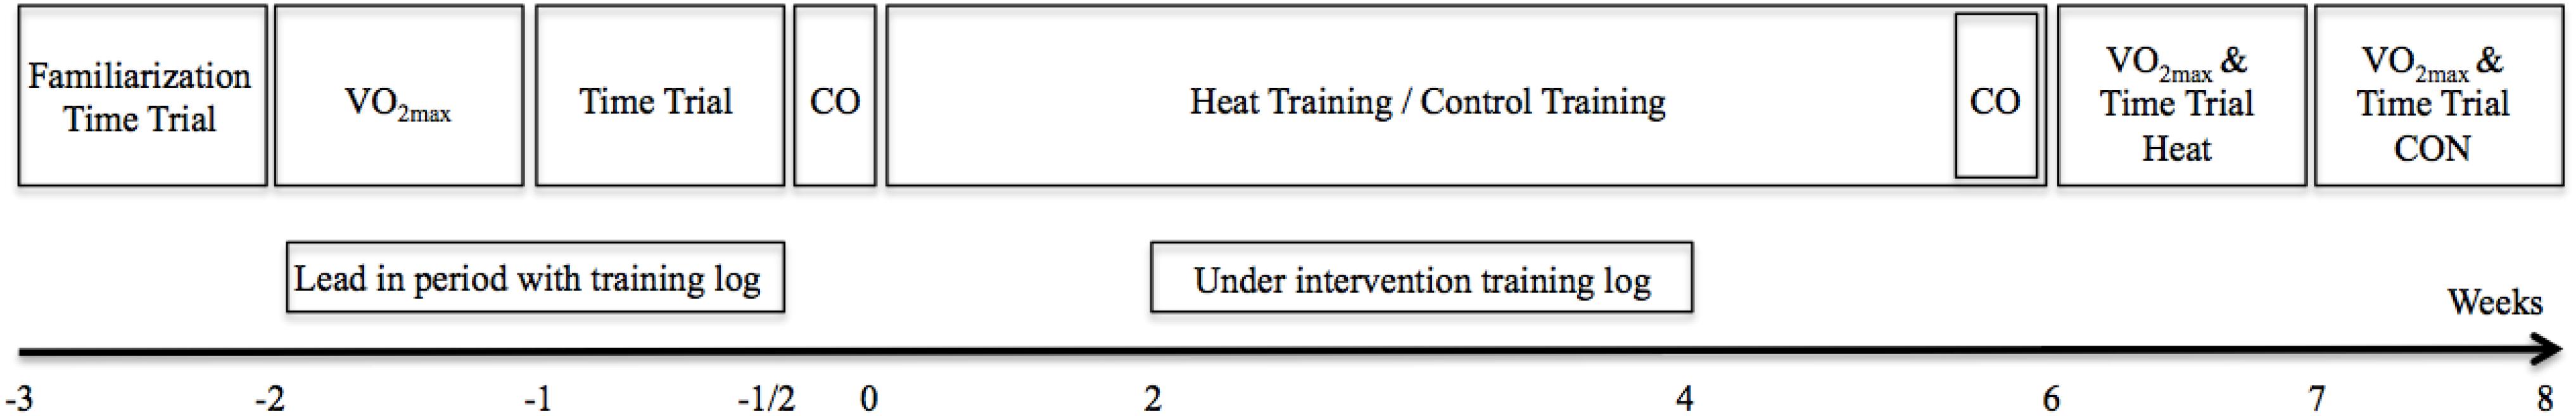 Frontiers Prolonged Heat Acclimation And Aerobic Performance In